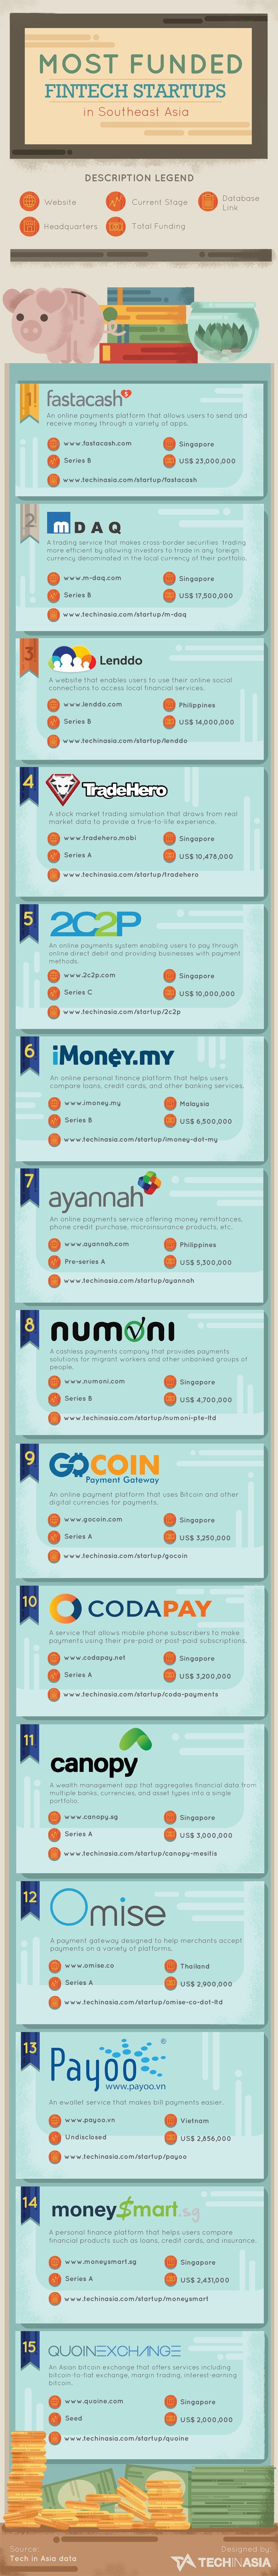 15 most funded fintech startups in sea infographic